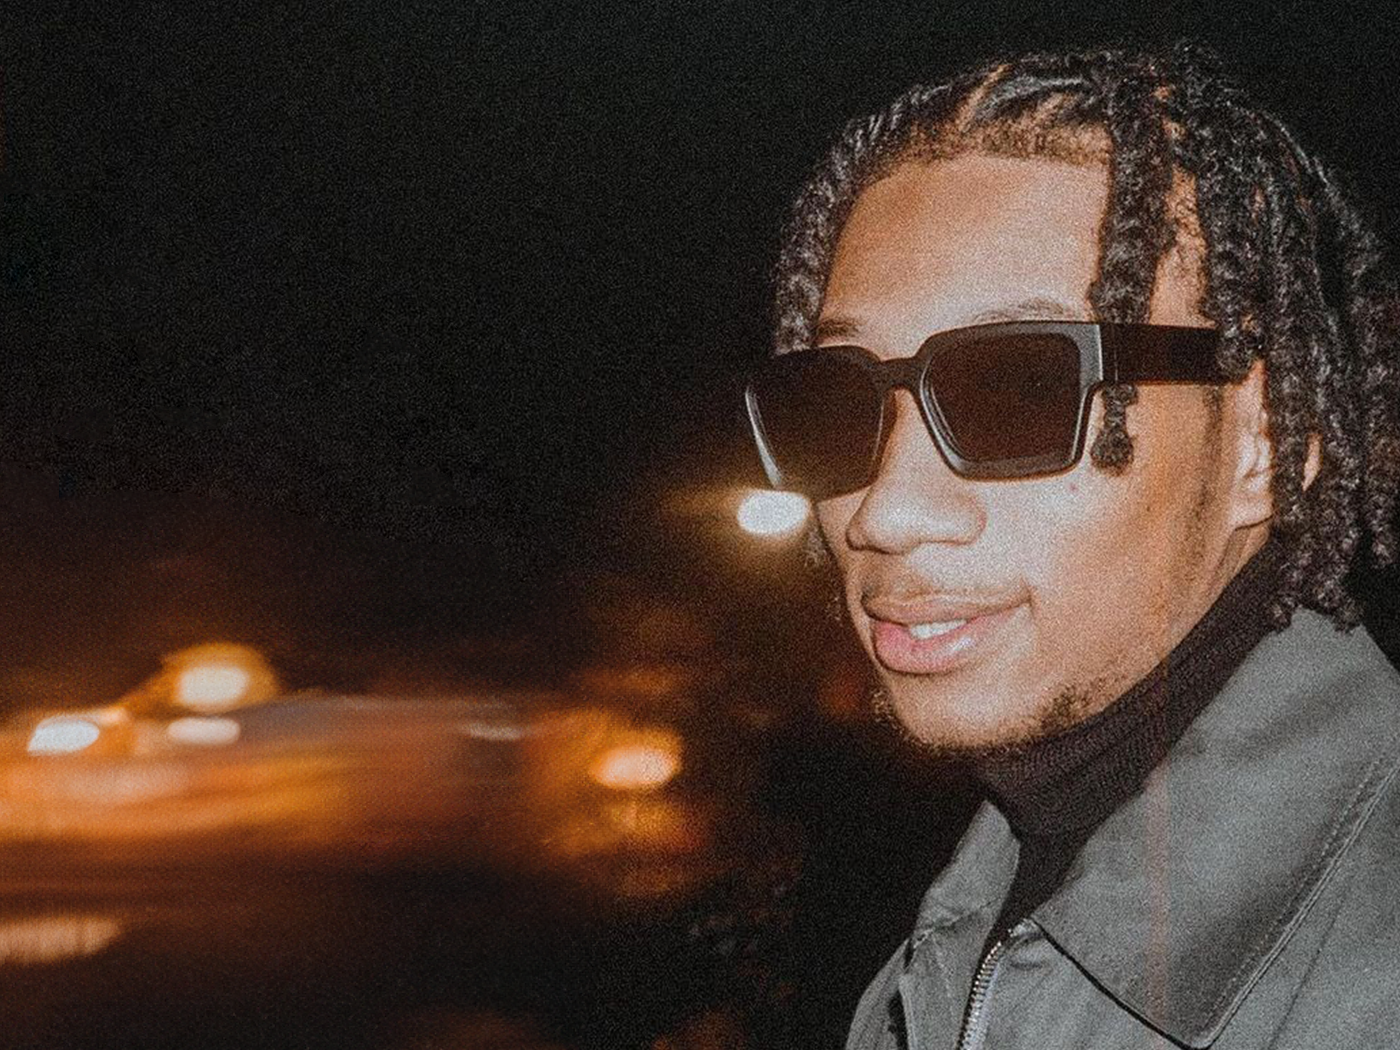 Digga D's Tokyo Sunglasses Steal the Spotlight in 'Us Against the World' Remix Video